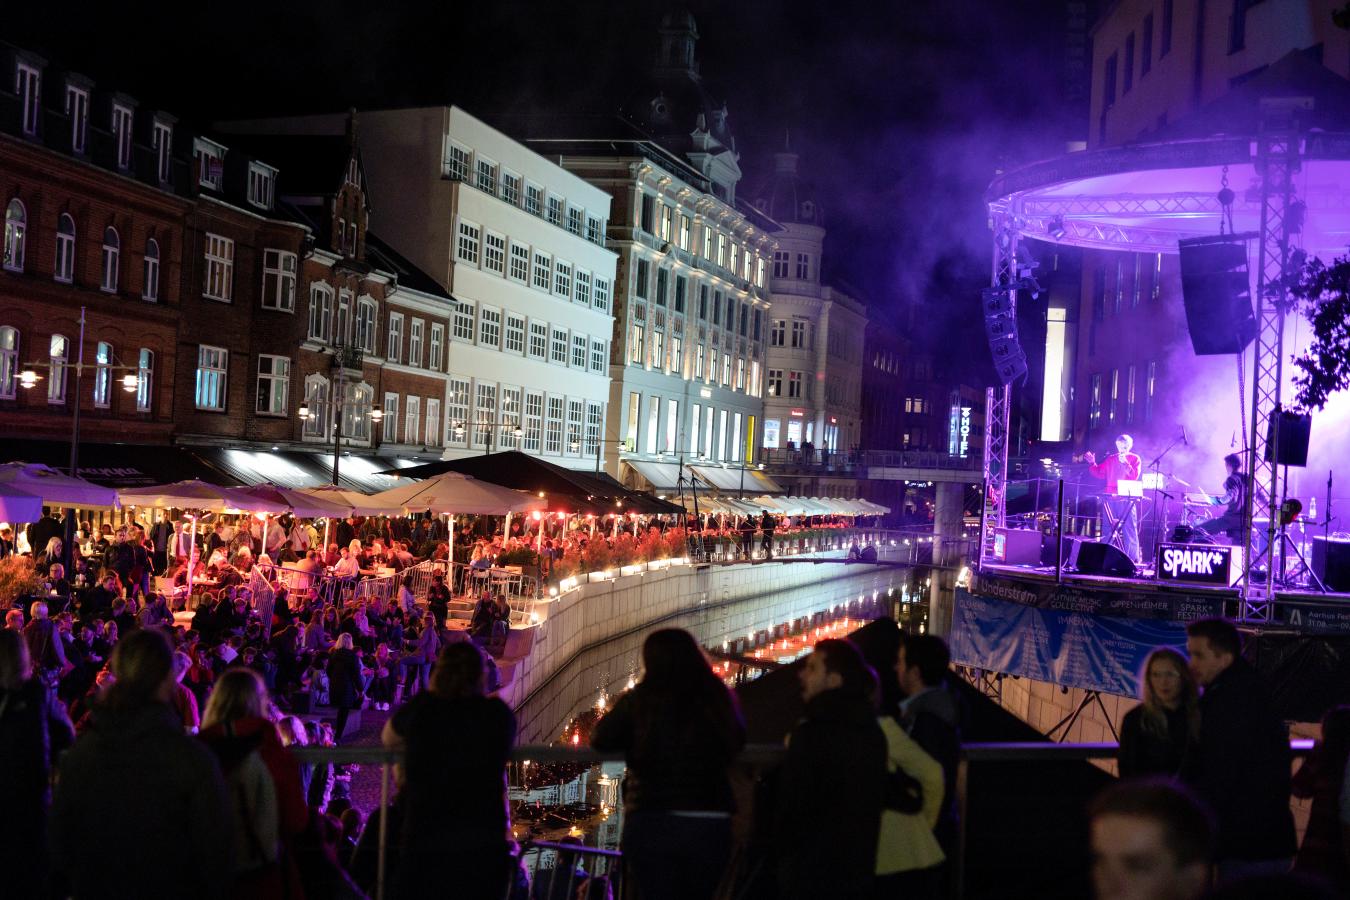 Top 10 events in Aarhus - The events worth travelling for! - VisitDenmark